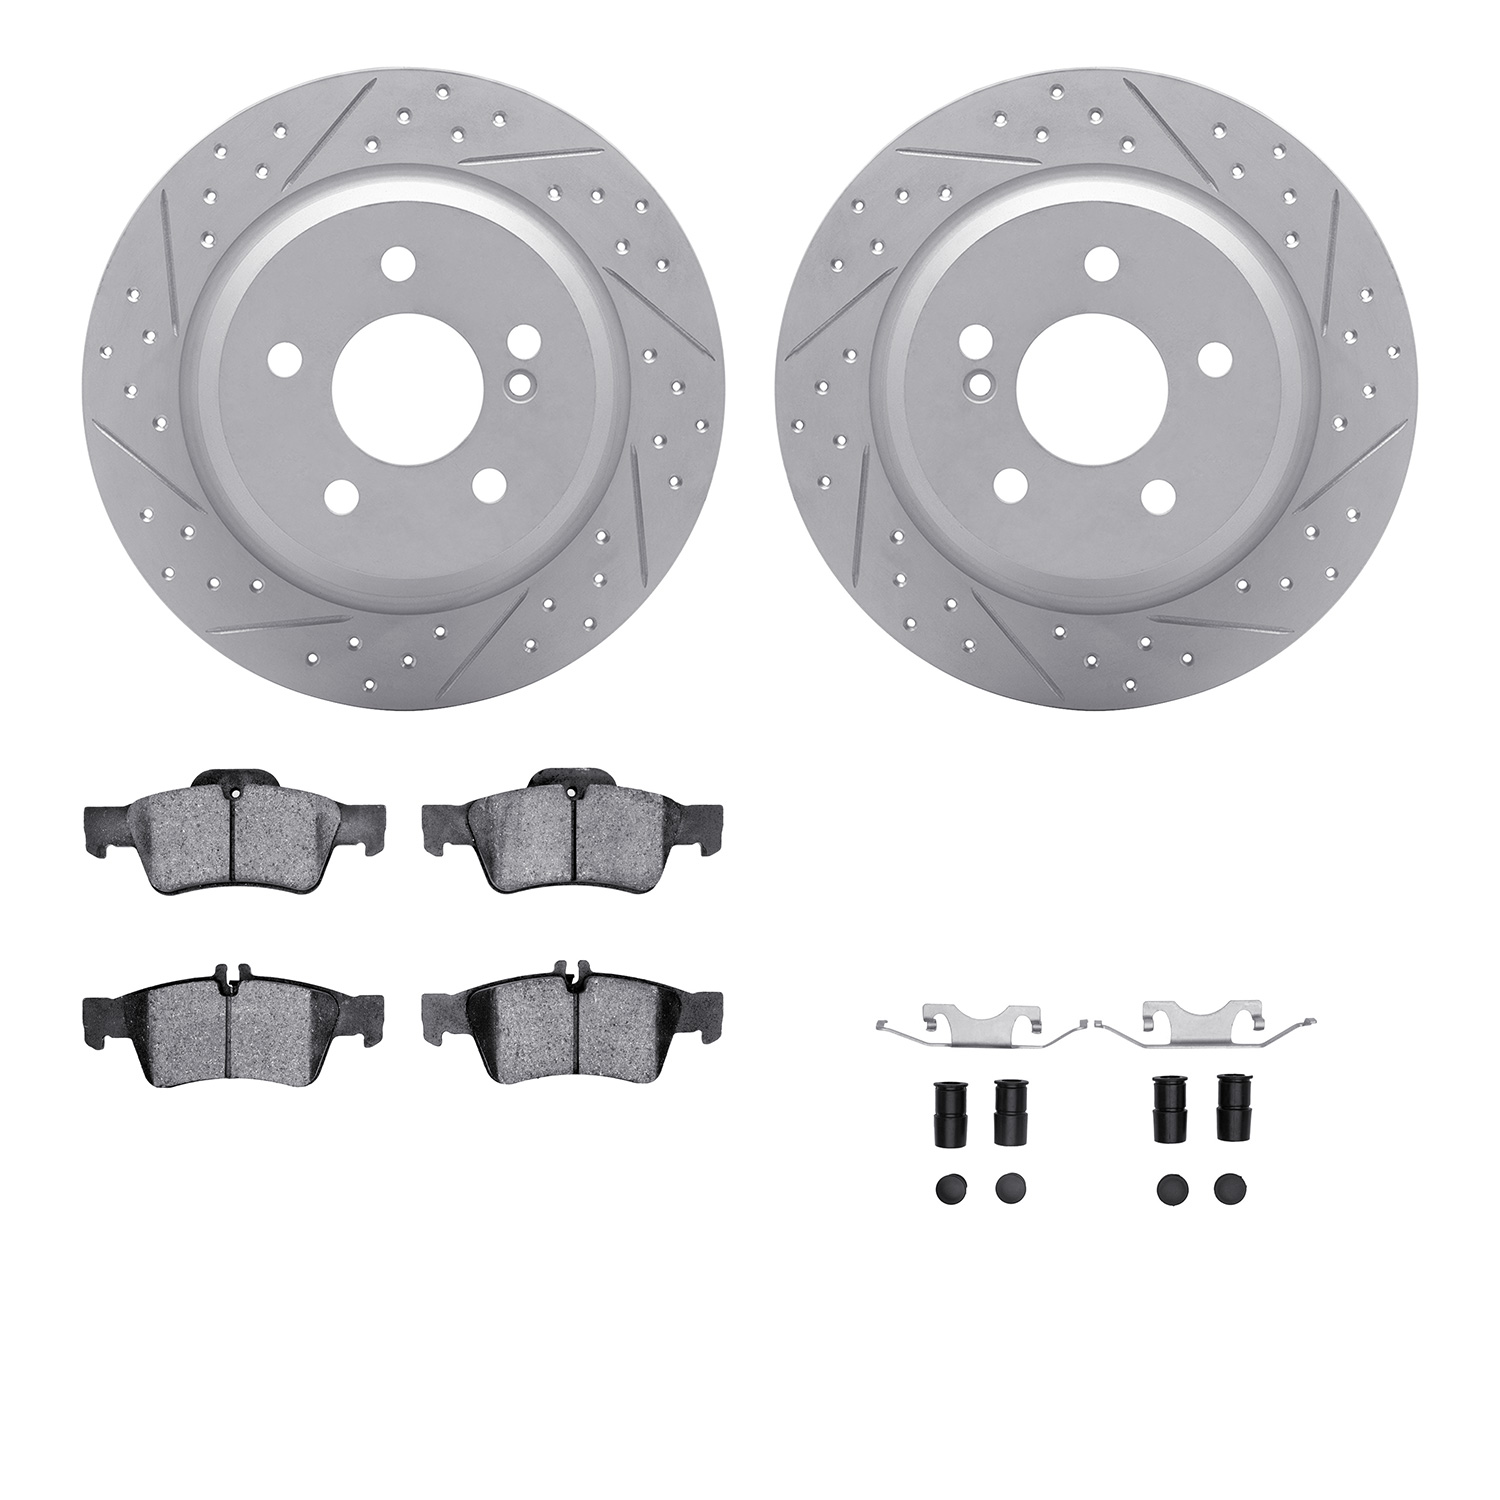 2512-63020 Geoperformance Drilled/Slotted Rotors w/5000 Advanced Brake Pads Kit & Hardware, 2014-2016 Mercedes-Benz, Position: R